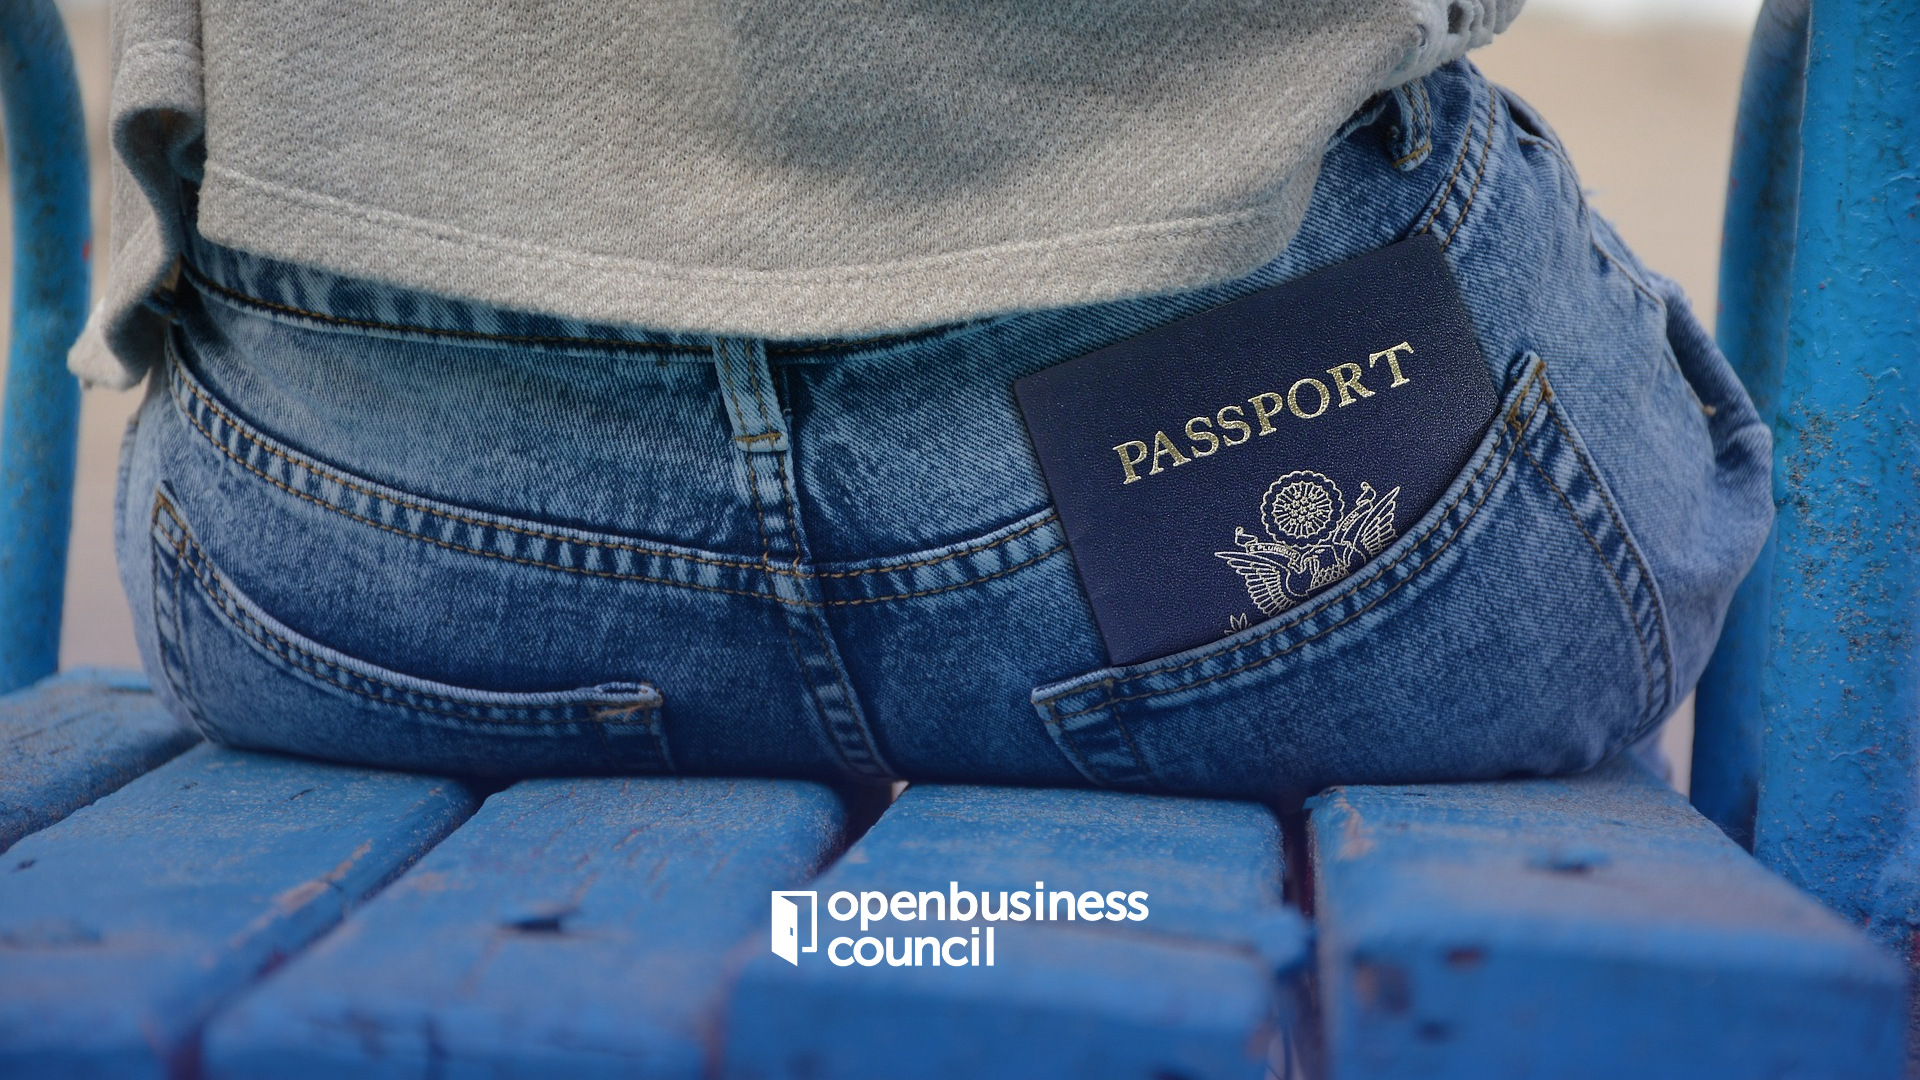 Obtaining Dual Citizenship: What Are the Offshore Investment Benefits a Second Passport Brings